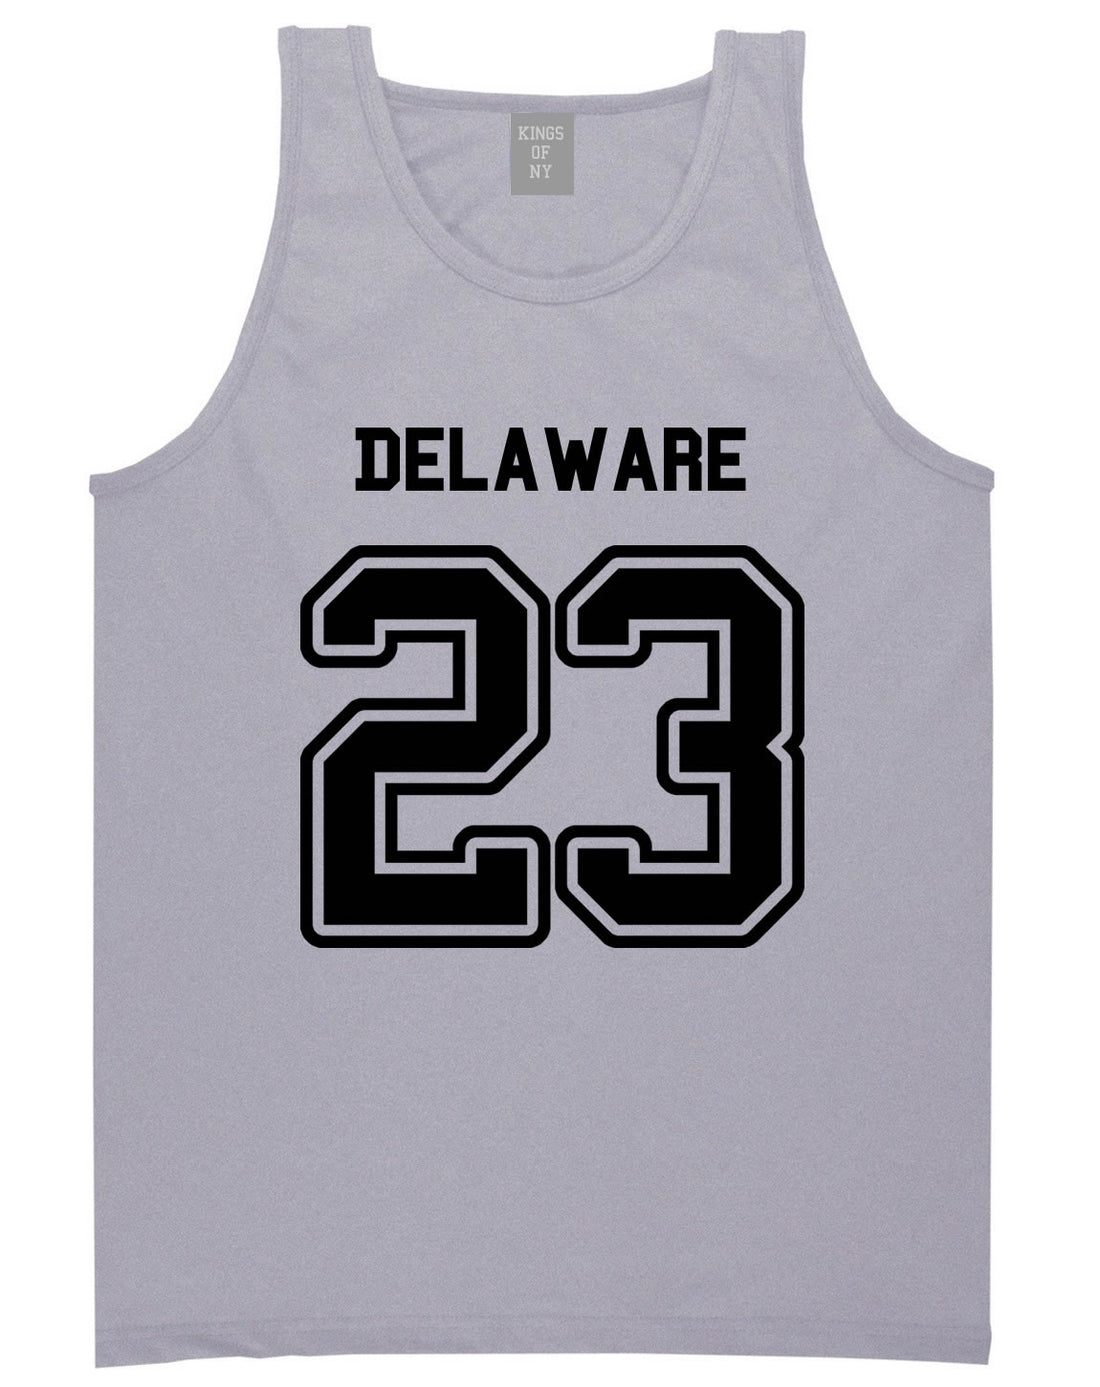 Sport Style Delaware 23 Team State Jersey Mens Tank Top By Kings Of NY